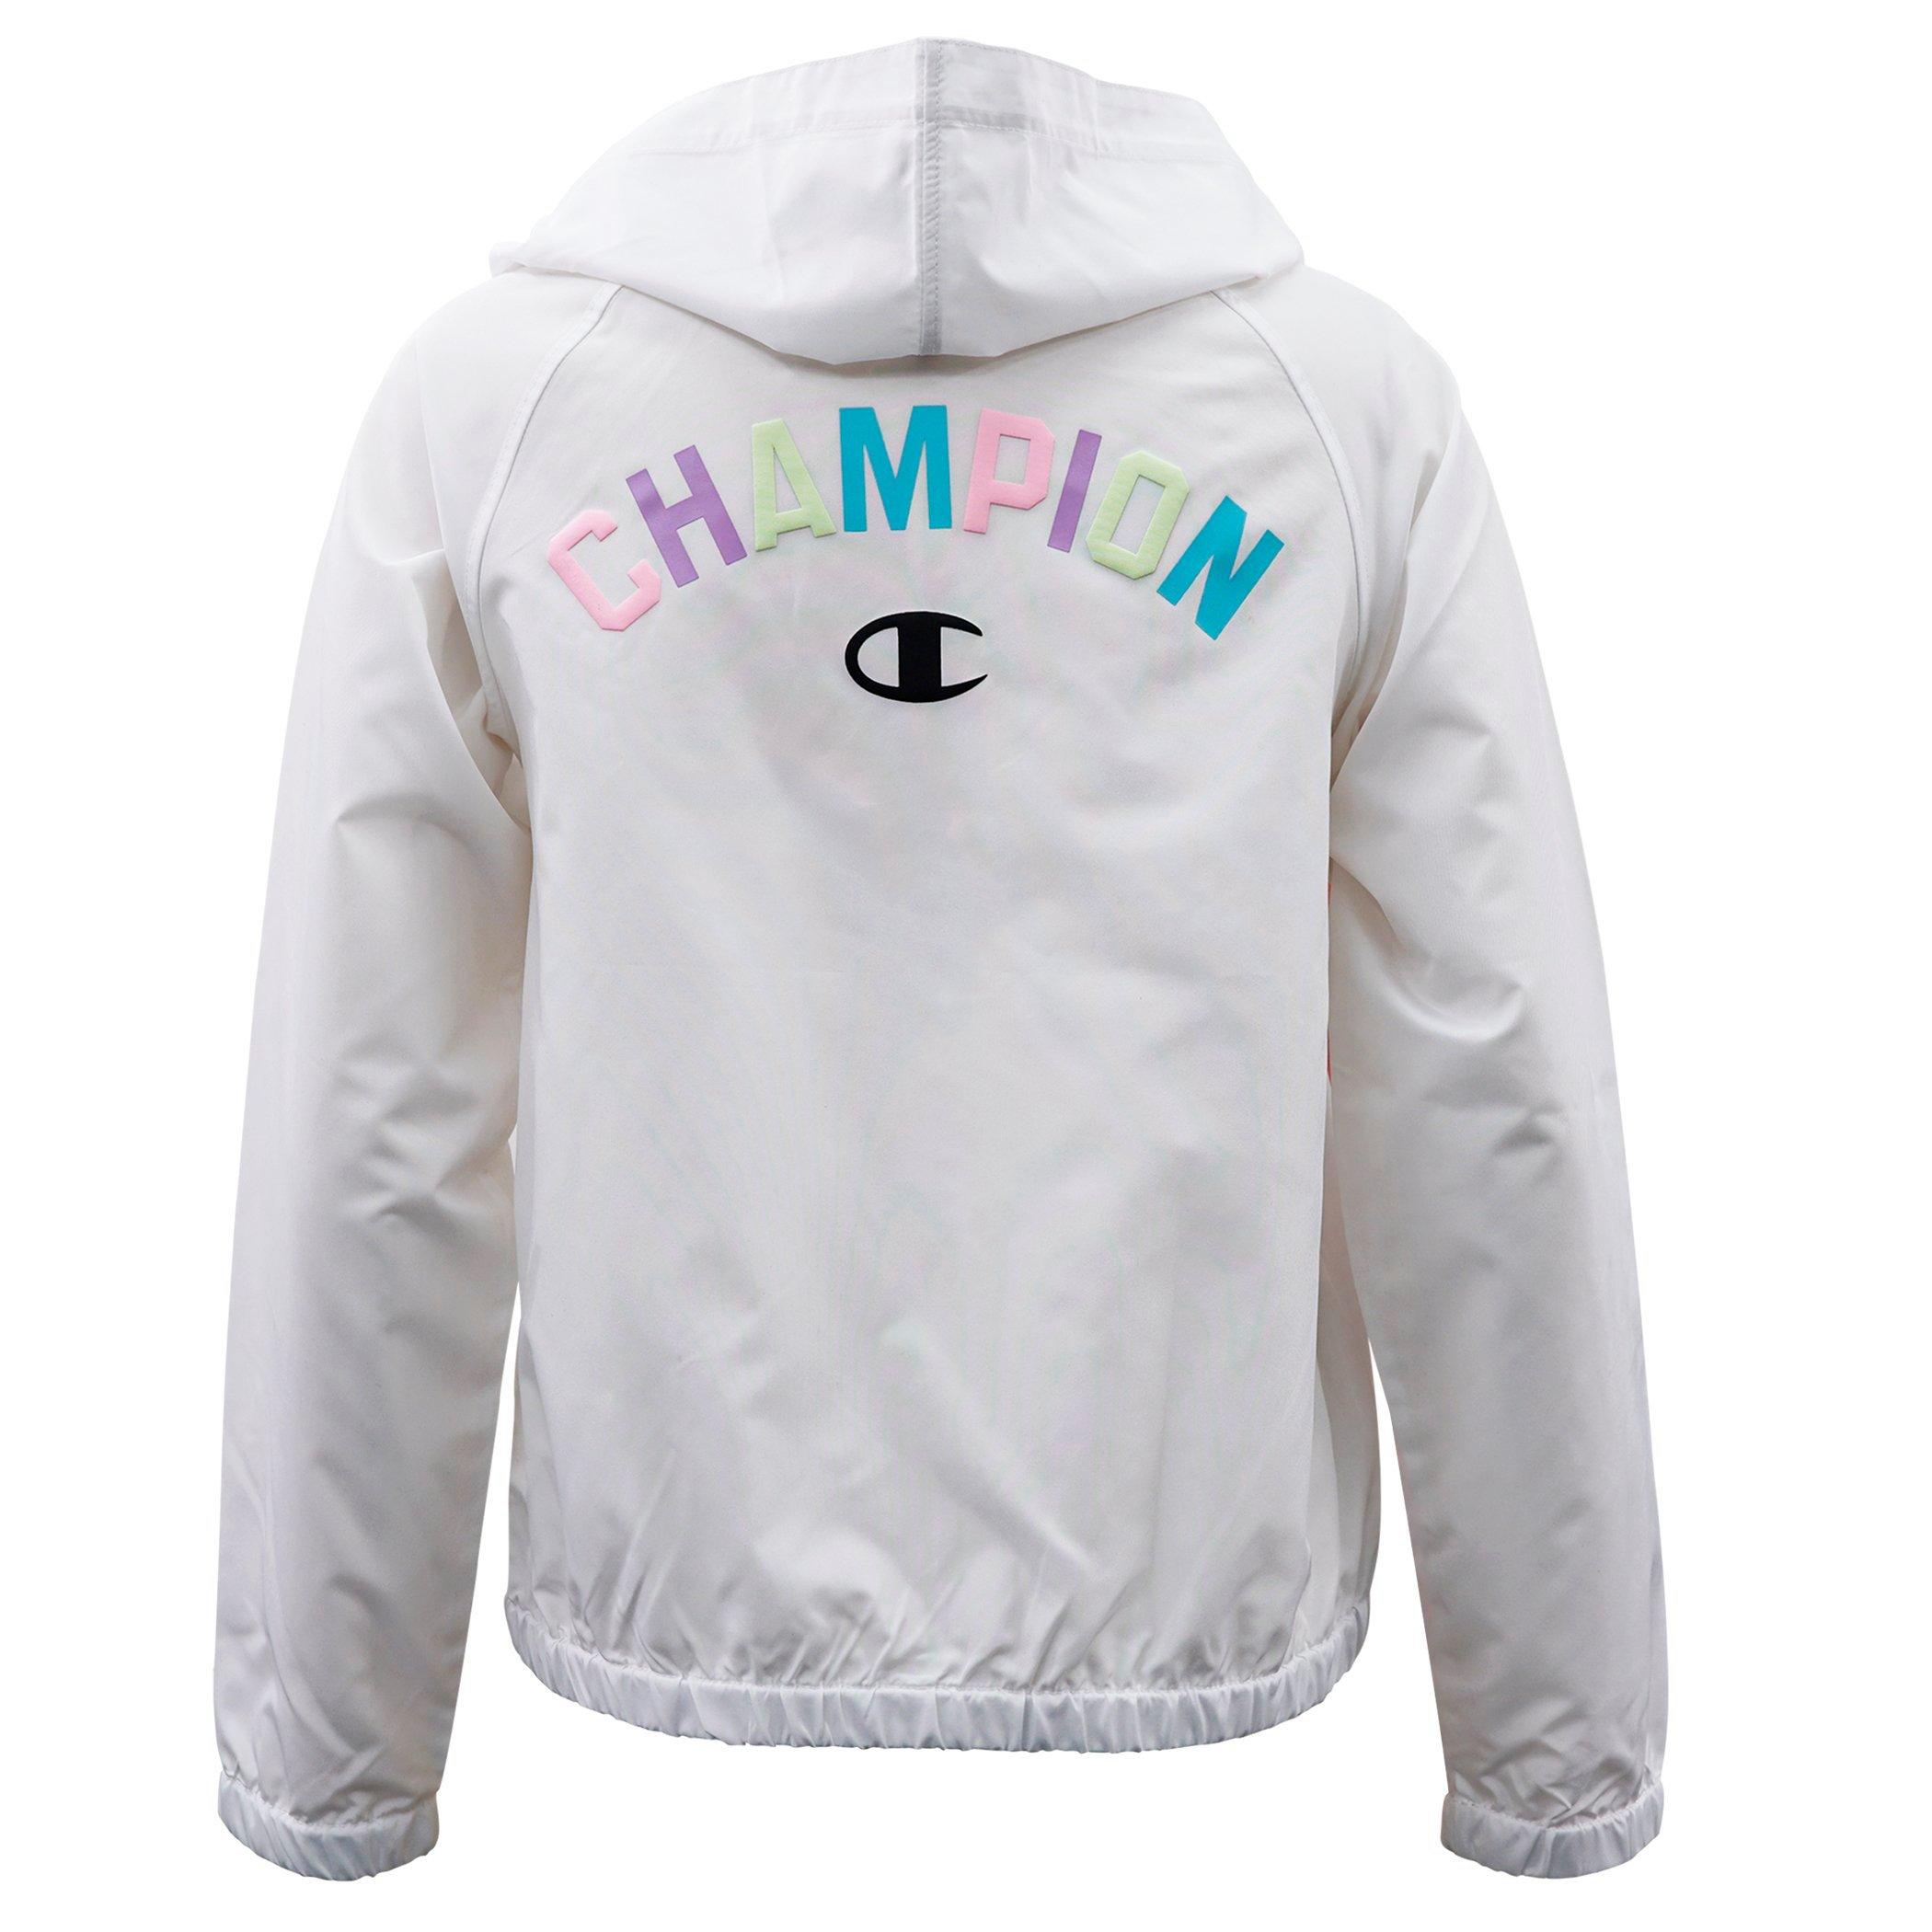 champion jackets for girls